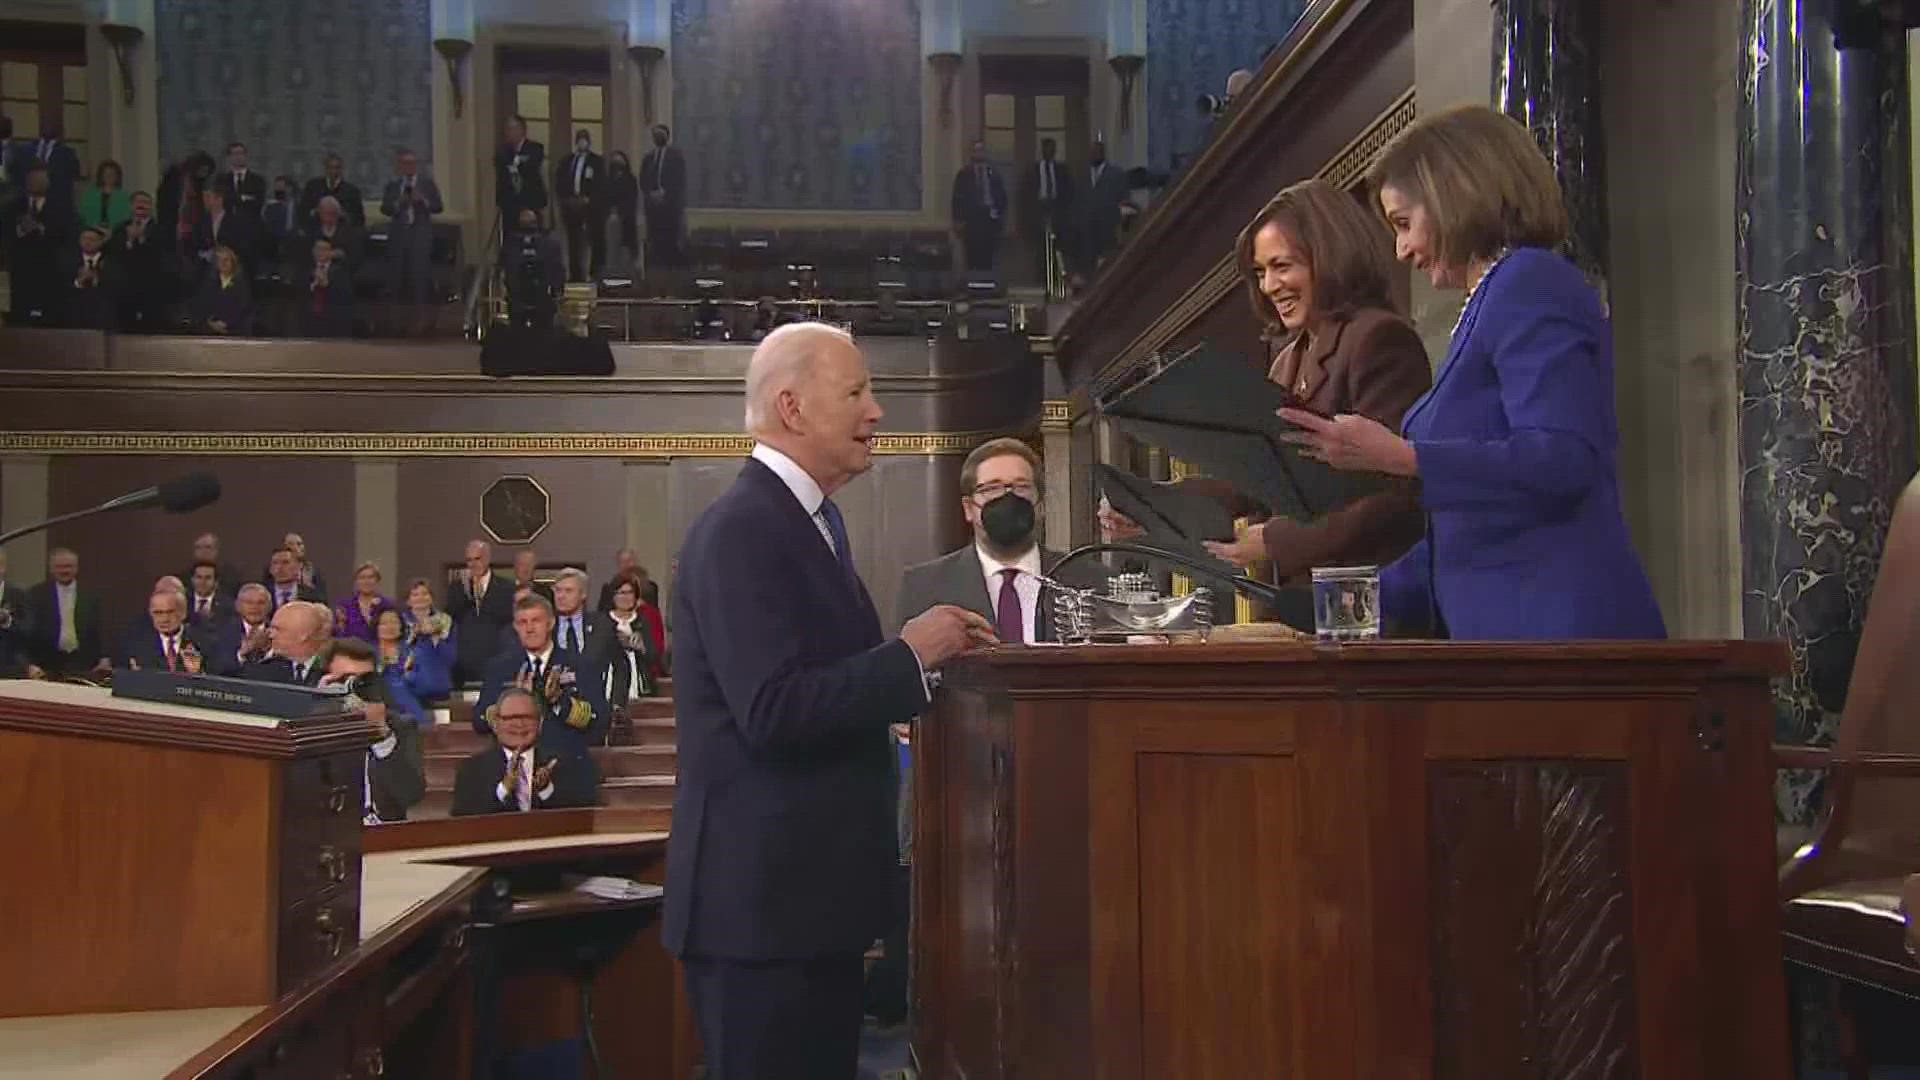 This is President Joe Biden's first State of the Union address since taking office last year.